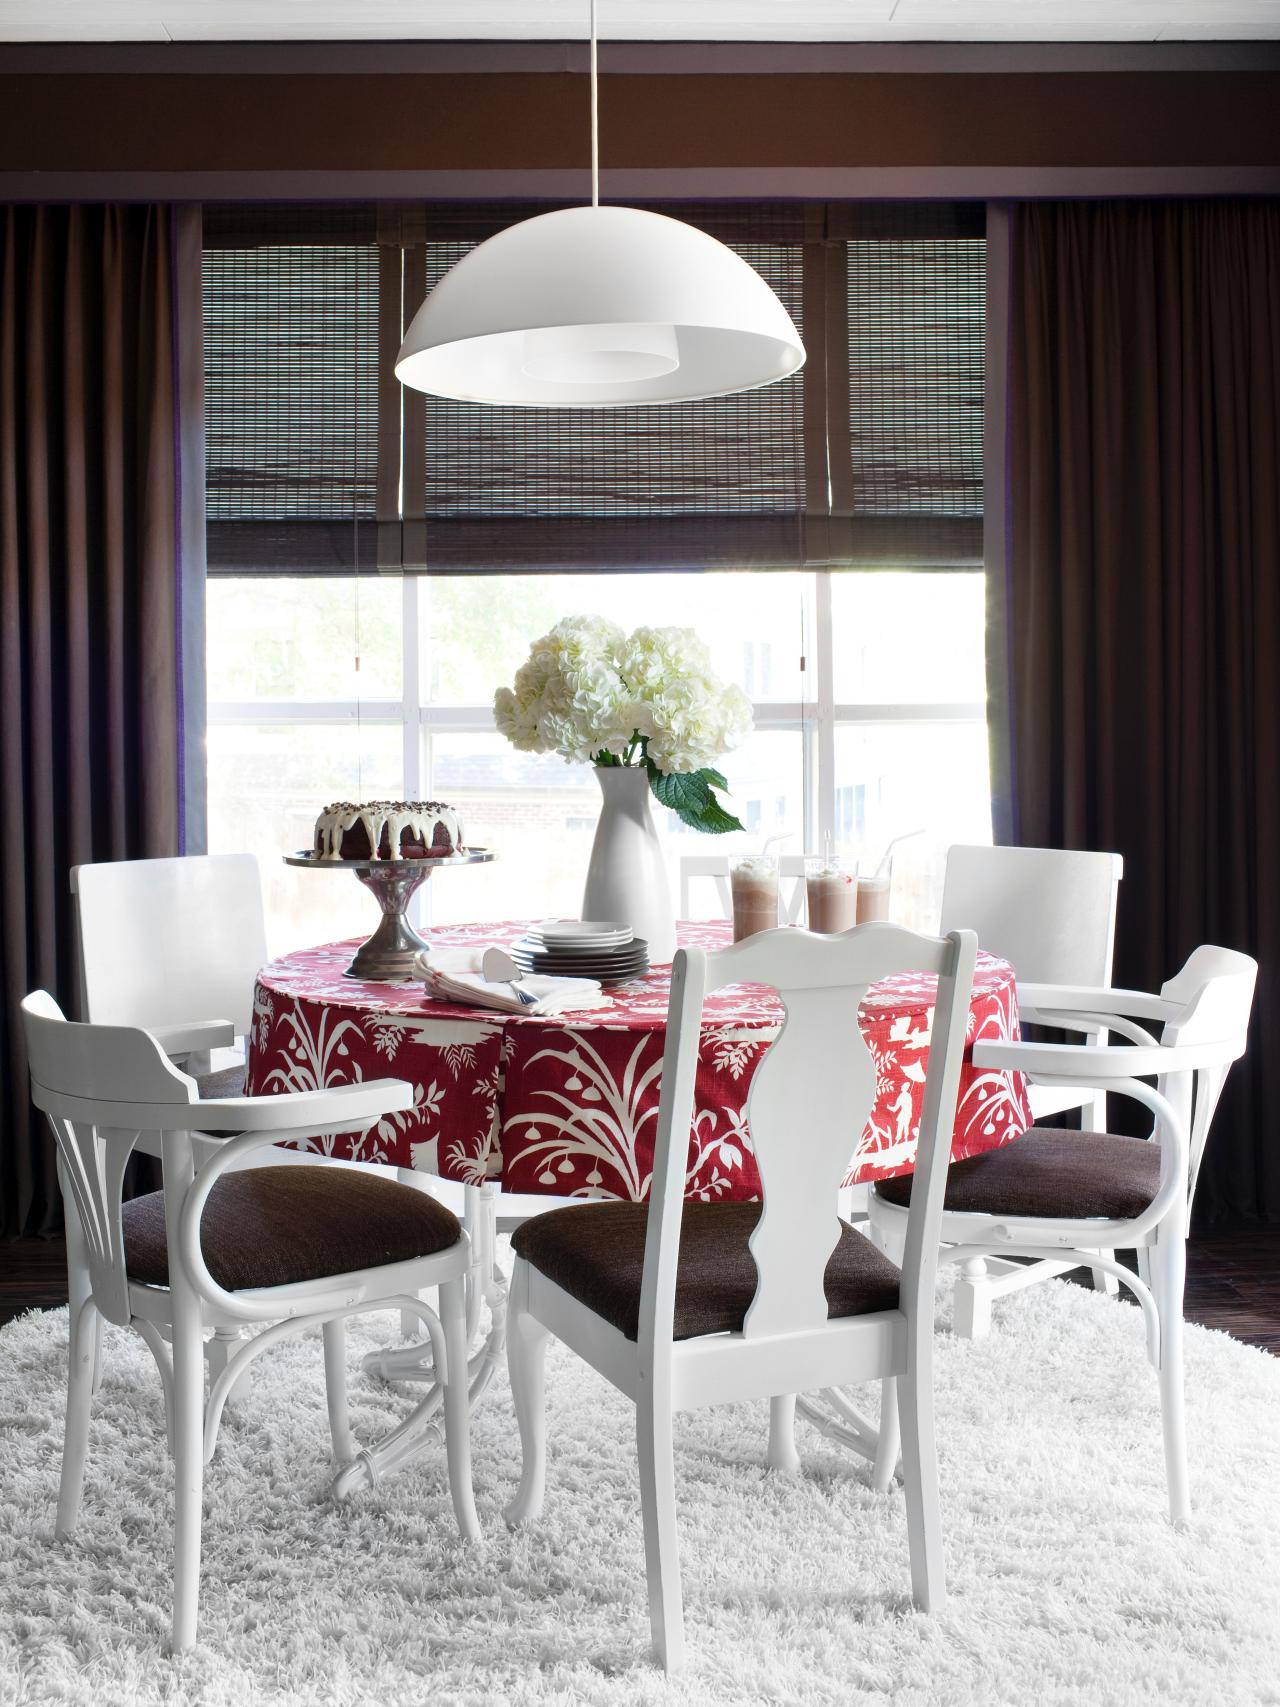 Paint Eclectic Chairs For A Cohesive, How To Paint Dining Chairs White